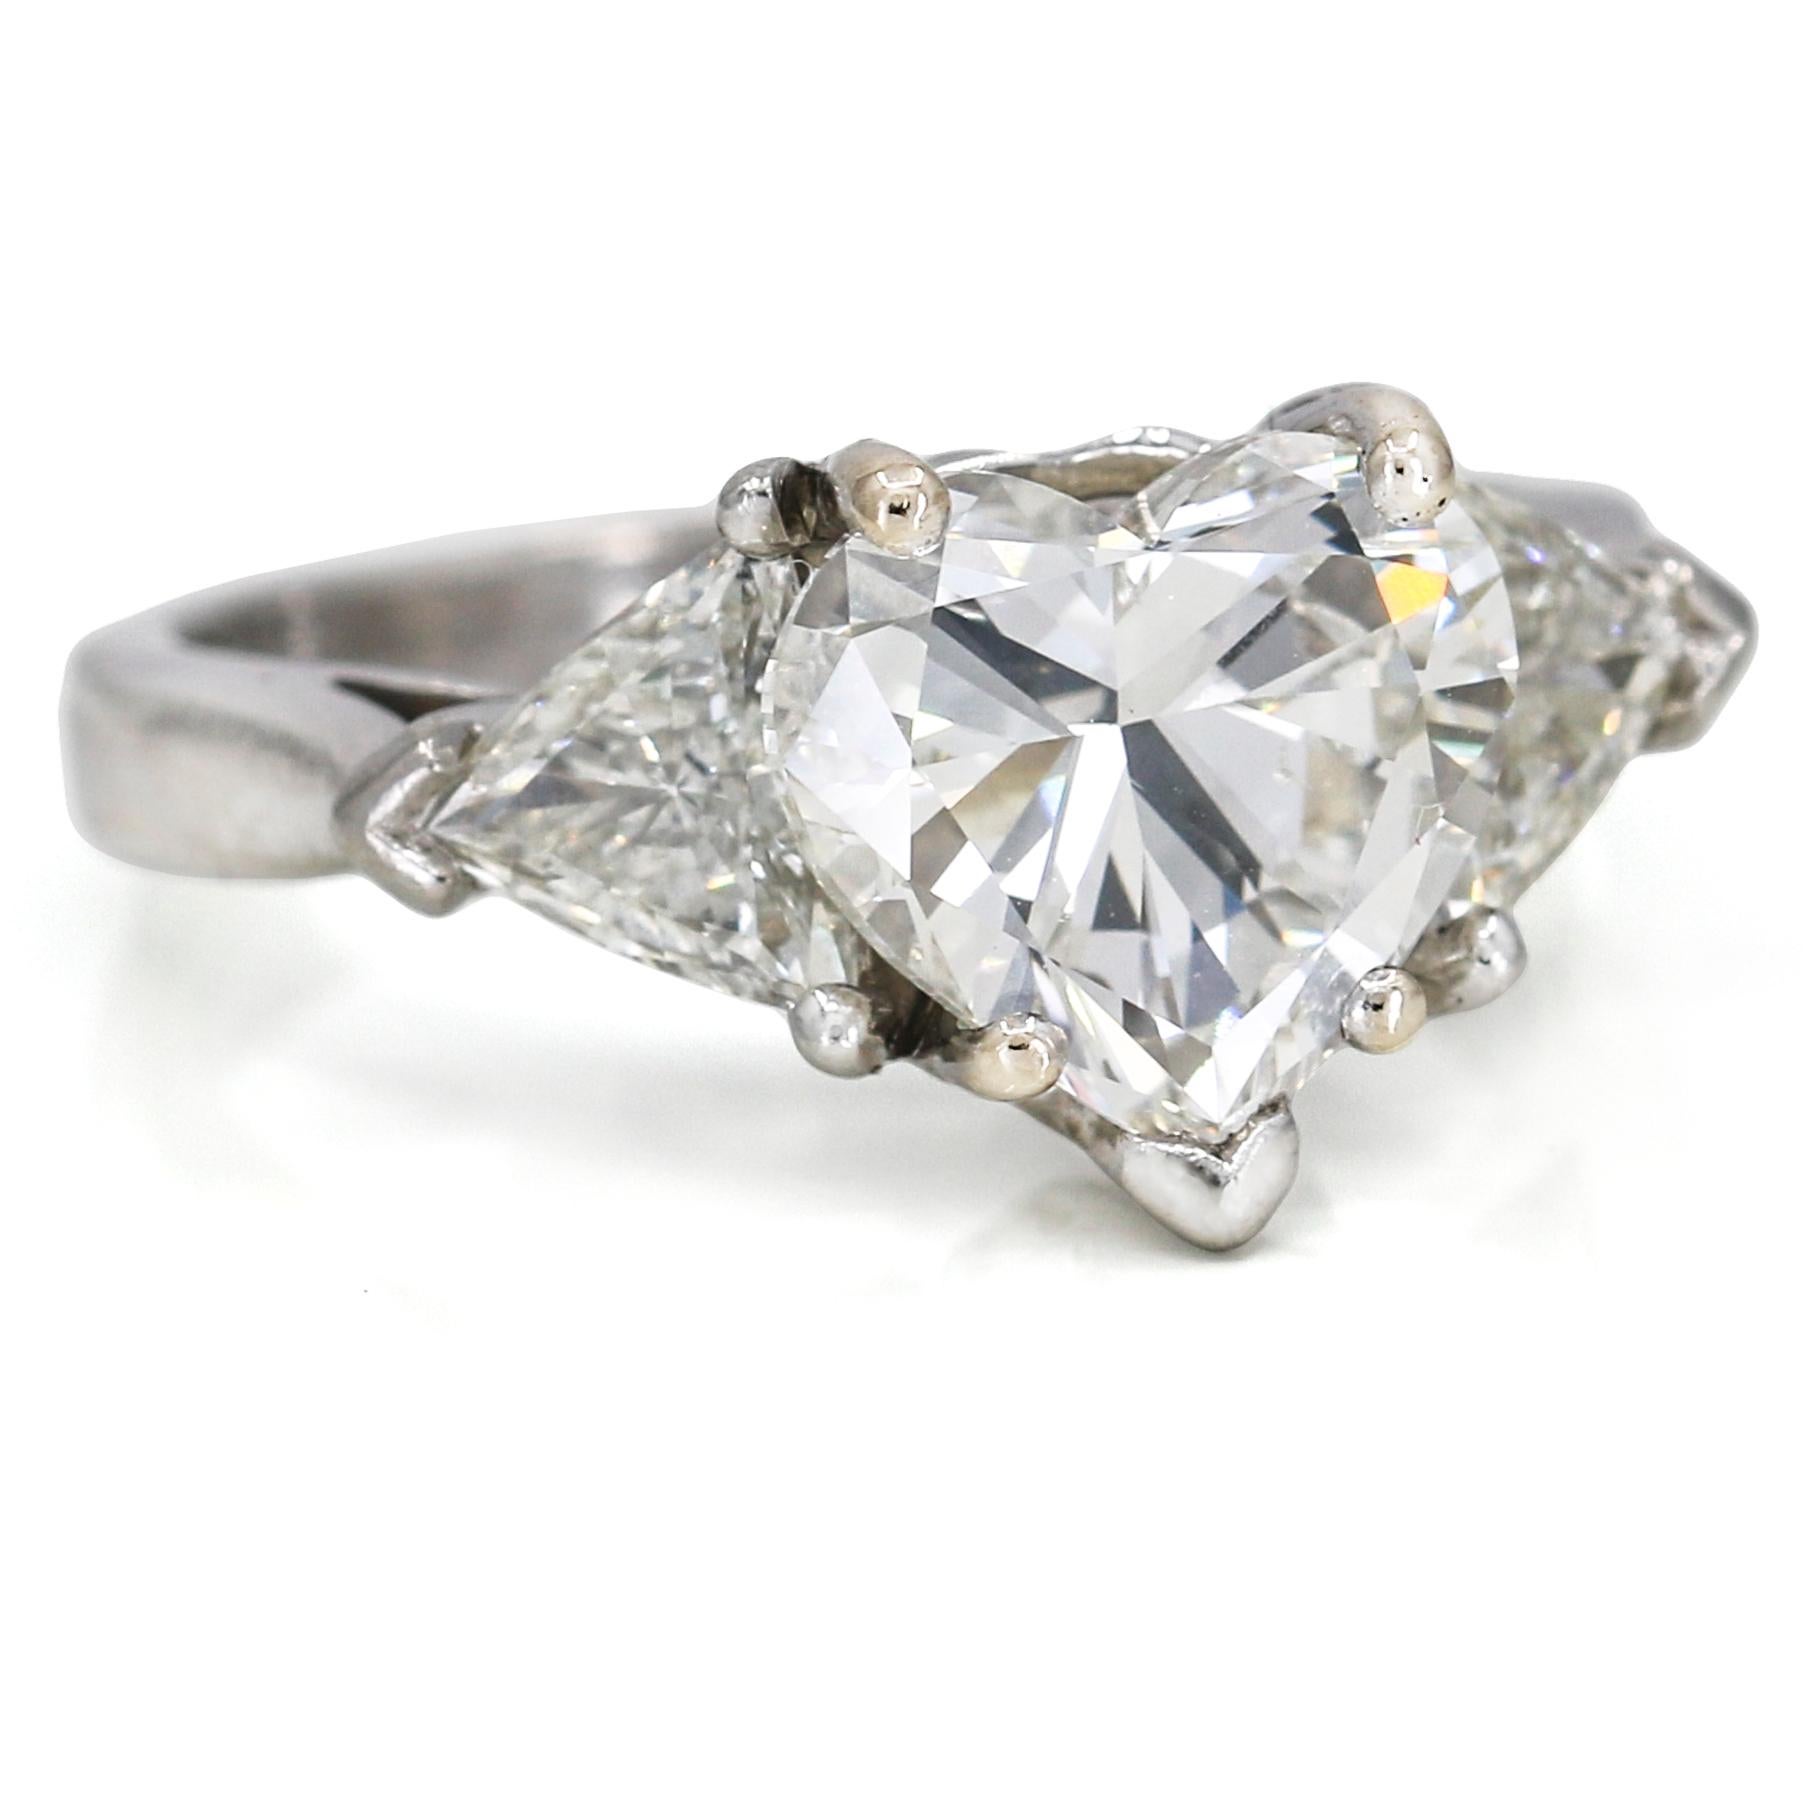 Contemporary GIA Certified 3.01 Carat Heart Cut Diamond Engagement Ring in Platinum For Sale